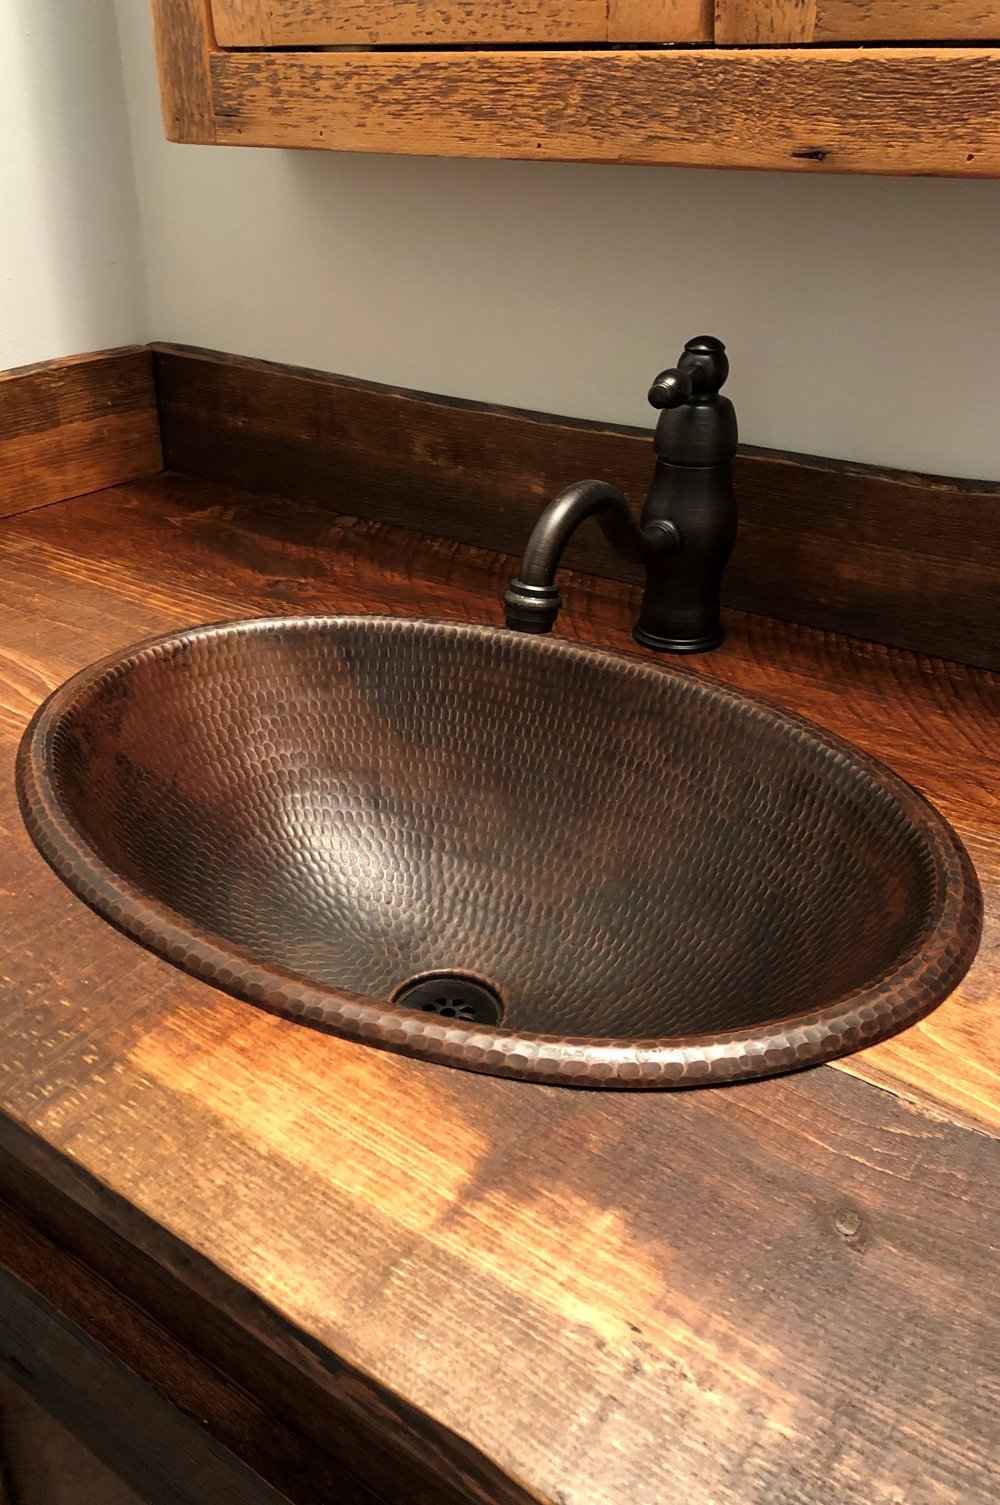 19" Oval Self Rimming Hammered Copper Sink - Rustic Kitchen & Bath - Bathroom Sink - Premier Copper Products